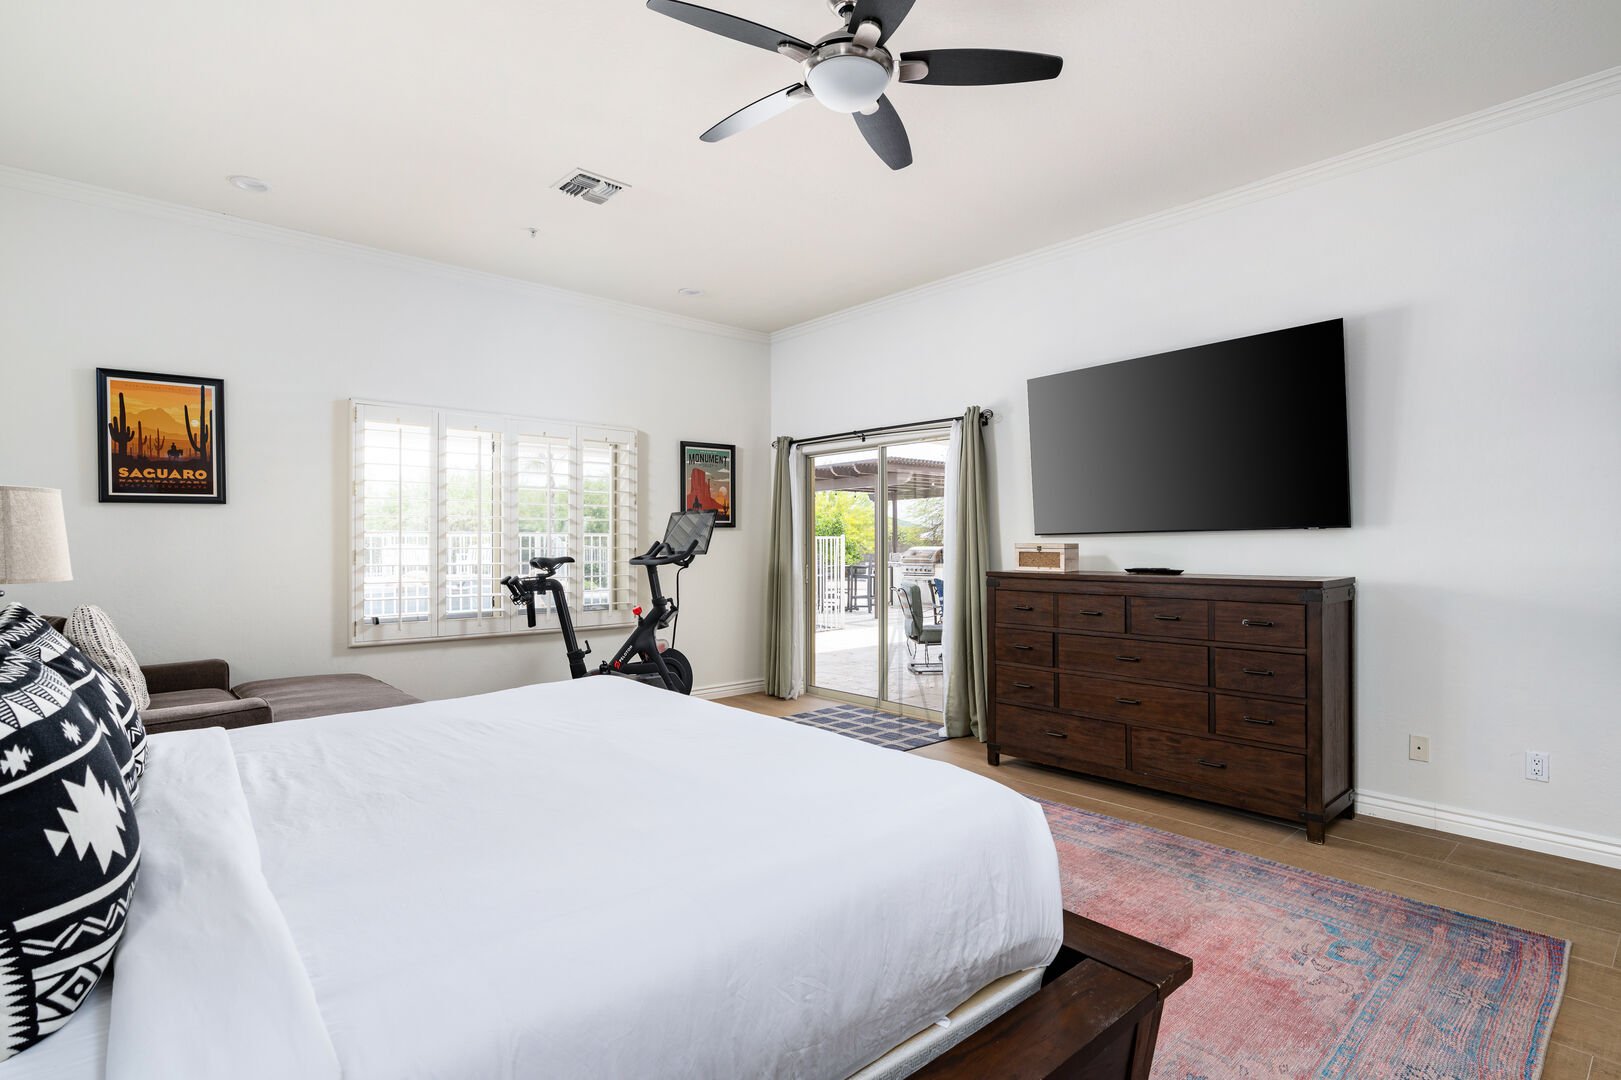 Main Suite w/ King Bed and Exercise Bike